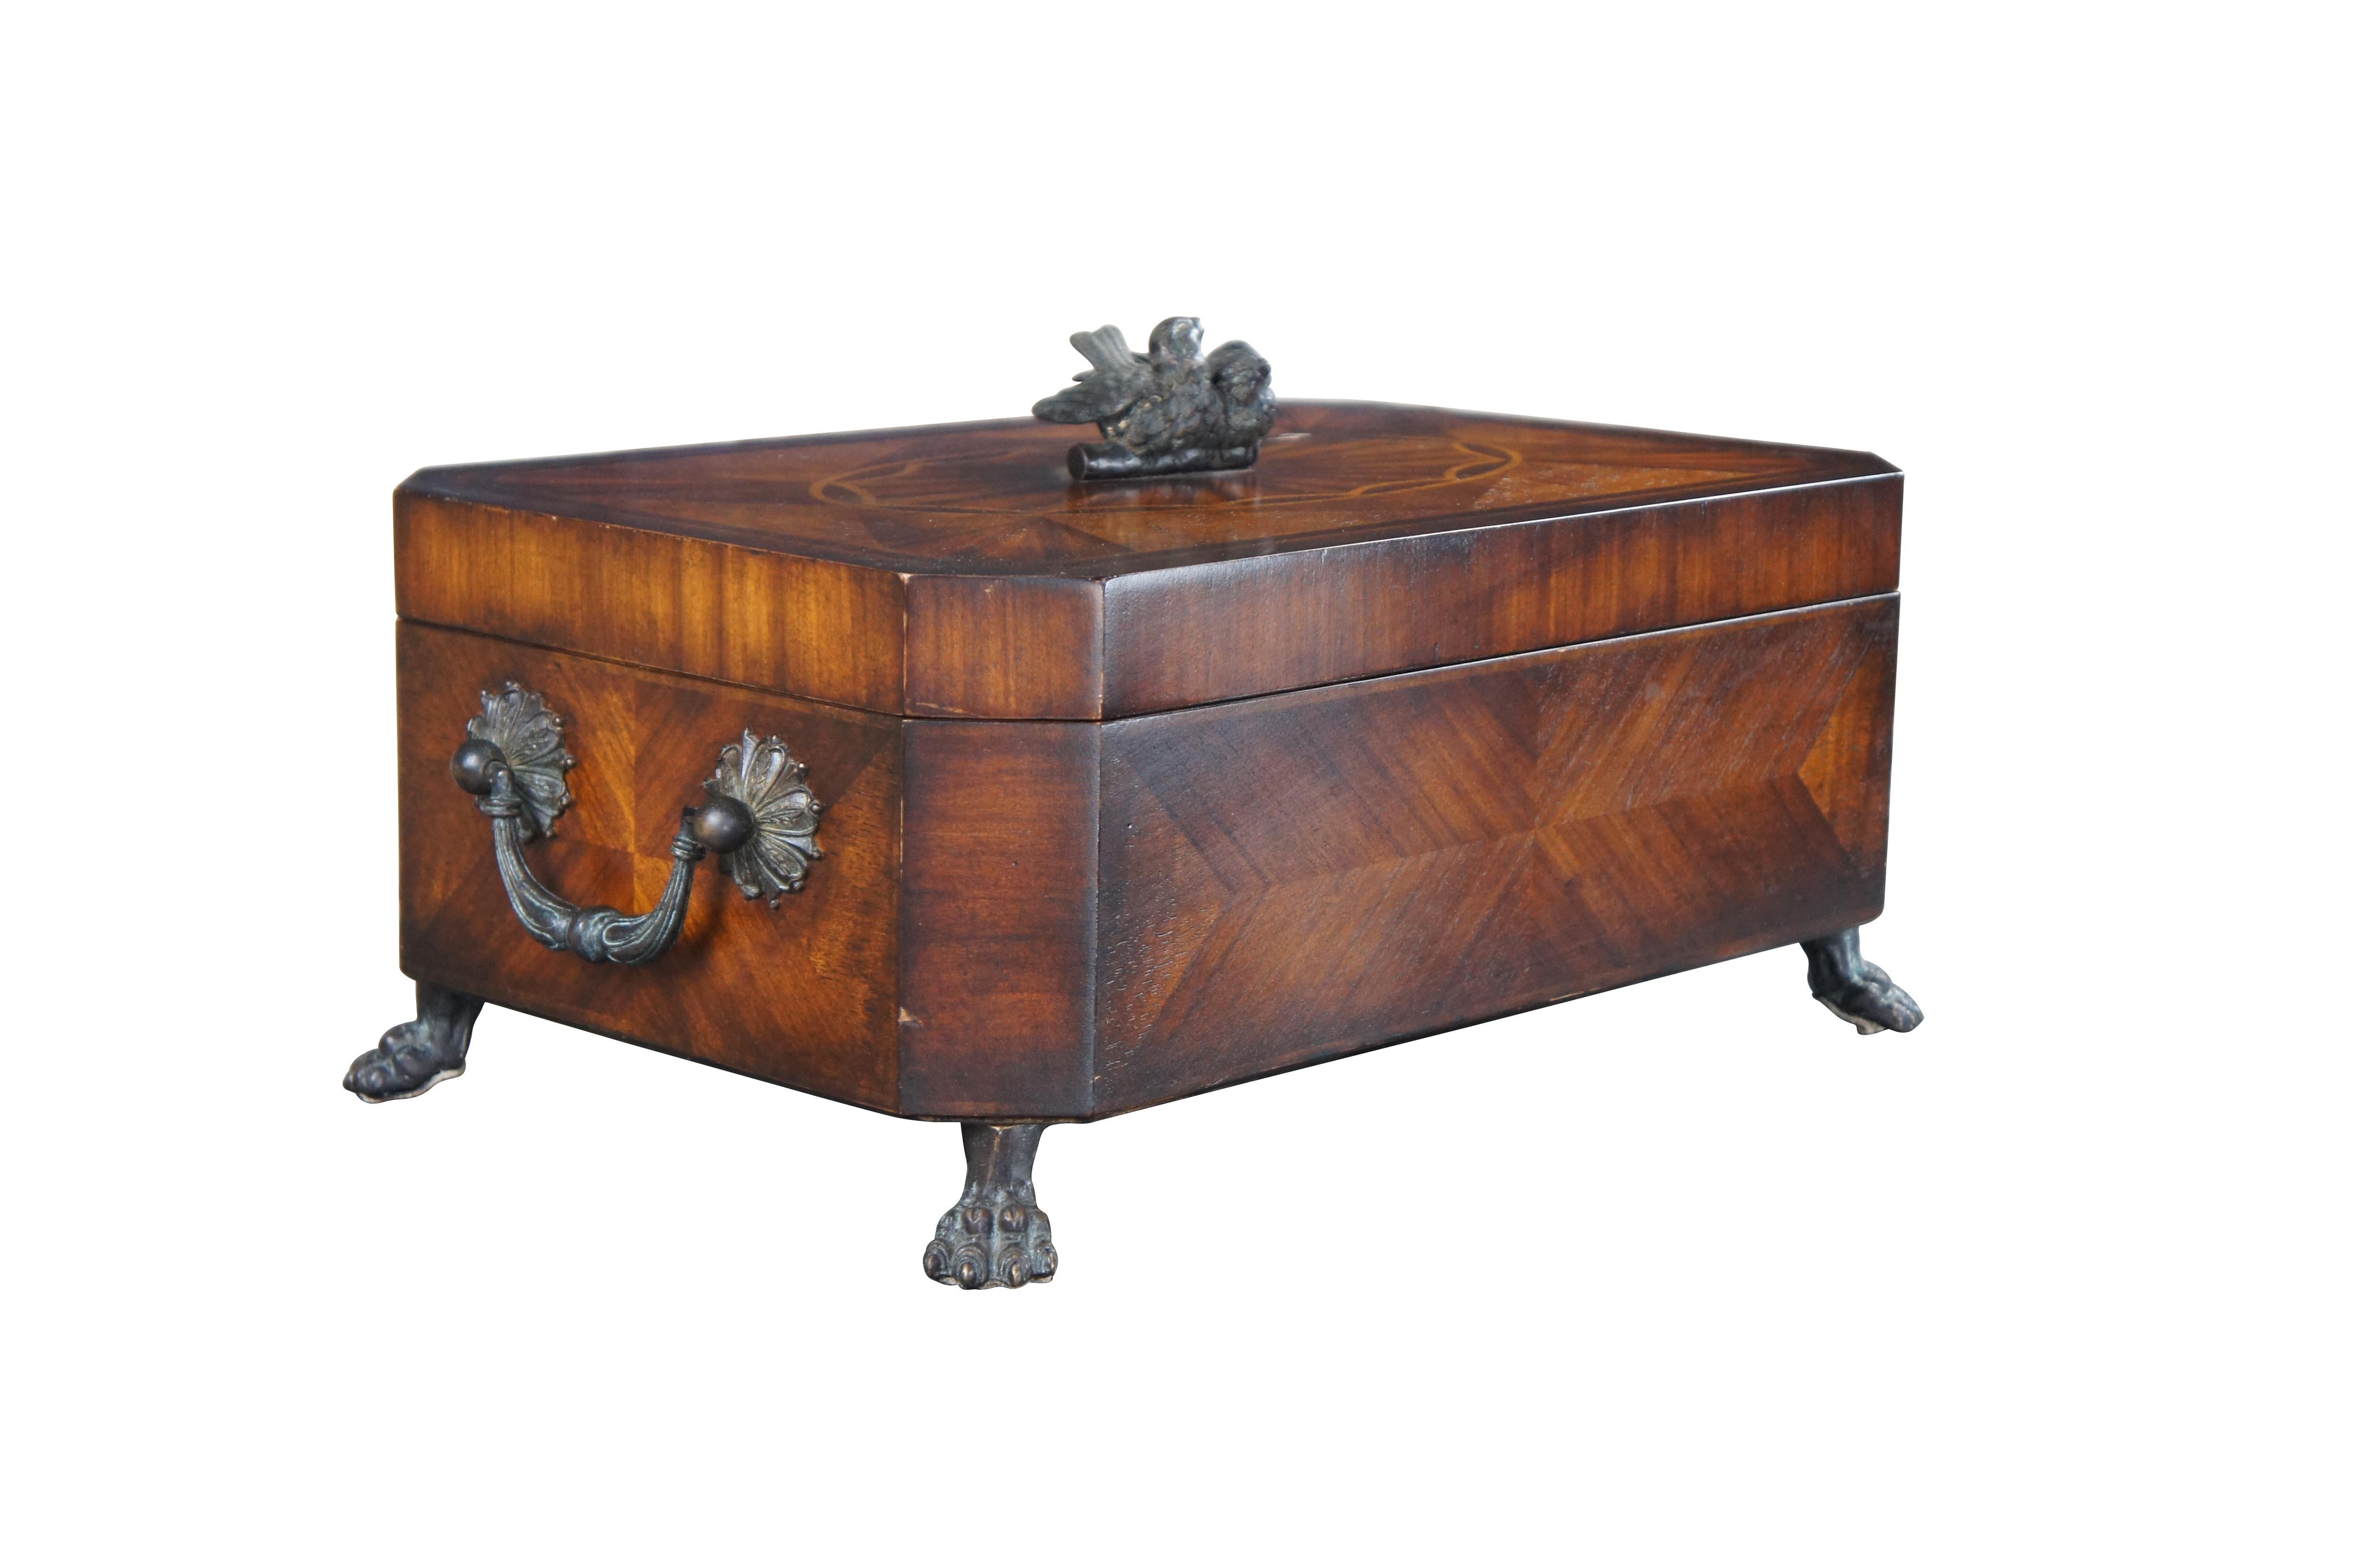 Theodore Alexander keepsake, trinket box or casket.  Features a matchbook veneer mahogany frame with parquetry top and dove finial.  Includes two handles along the sides and claw feet.  The marquetry inlay top is inspired by the meticulous inlays